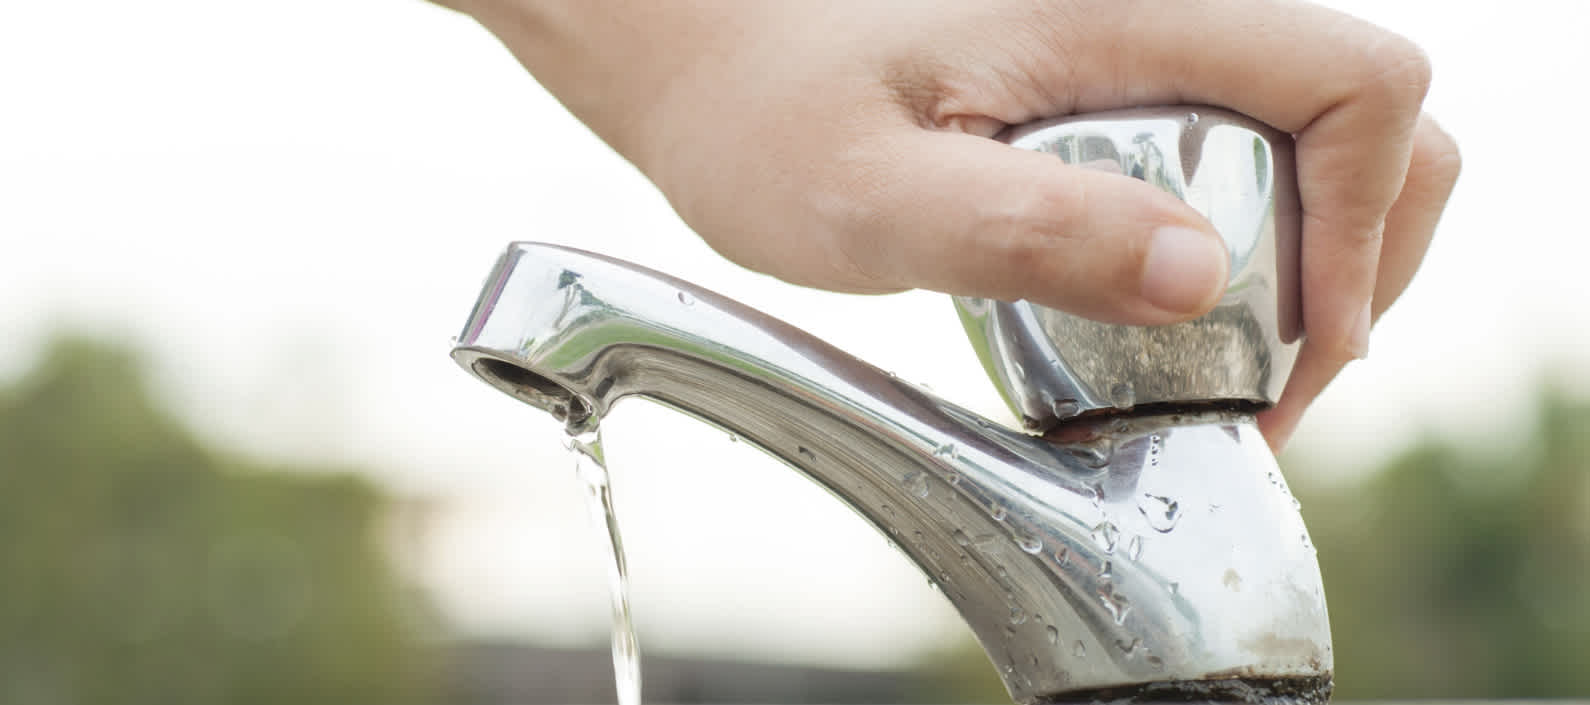 Conserving the water that comes out of a faucet